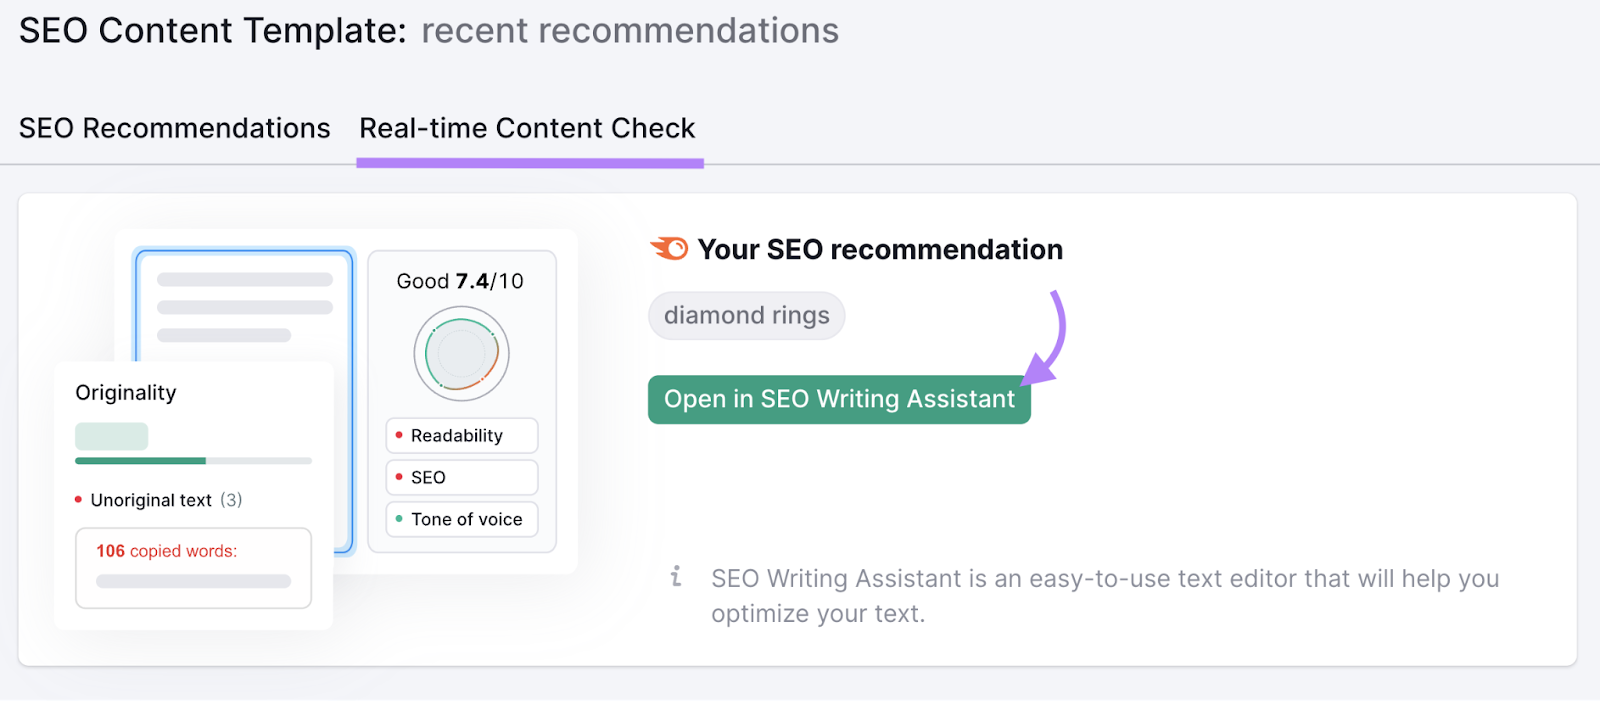 The "Open in SEO Writing Assistant" button in the "Real-time Content Check" tab of the SEO Content Template